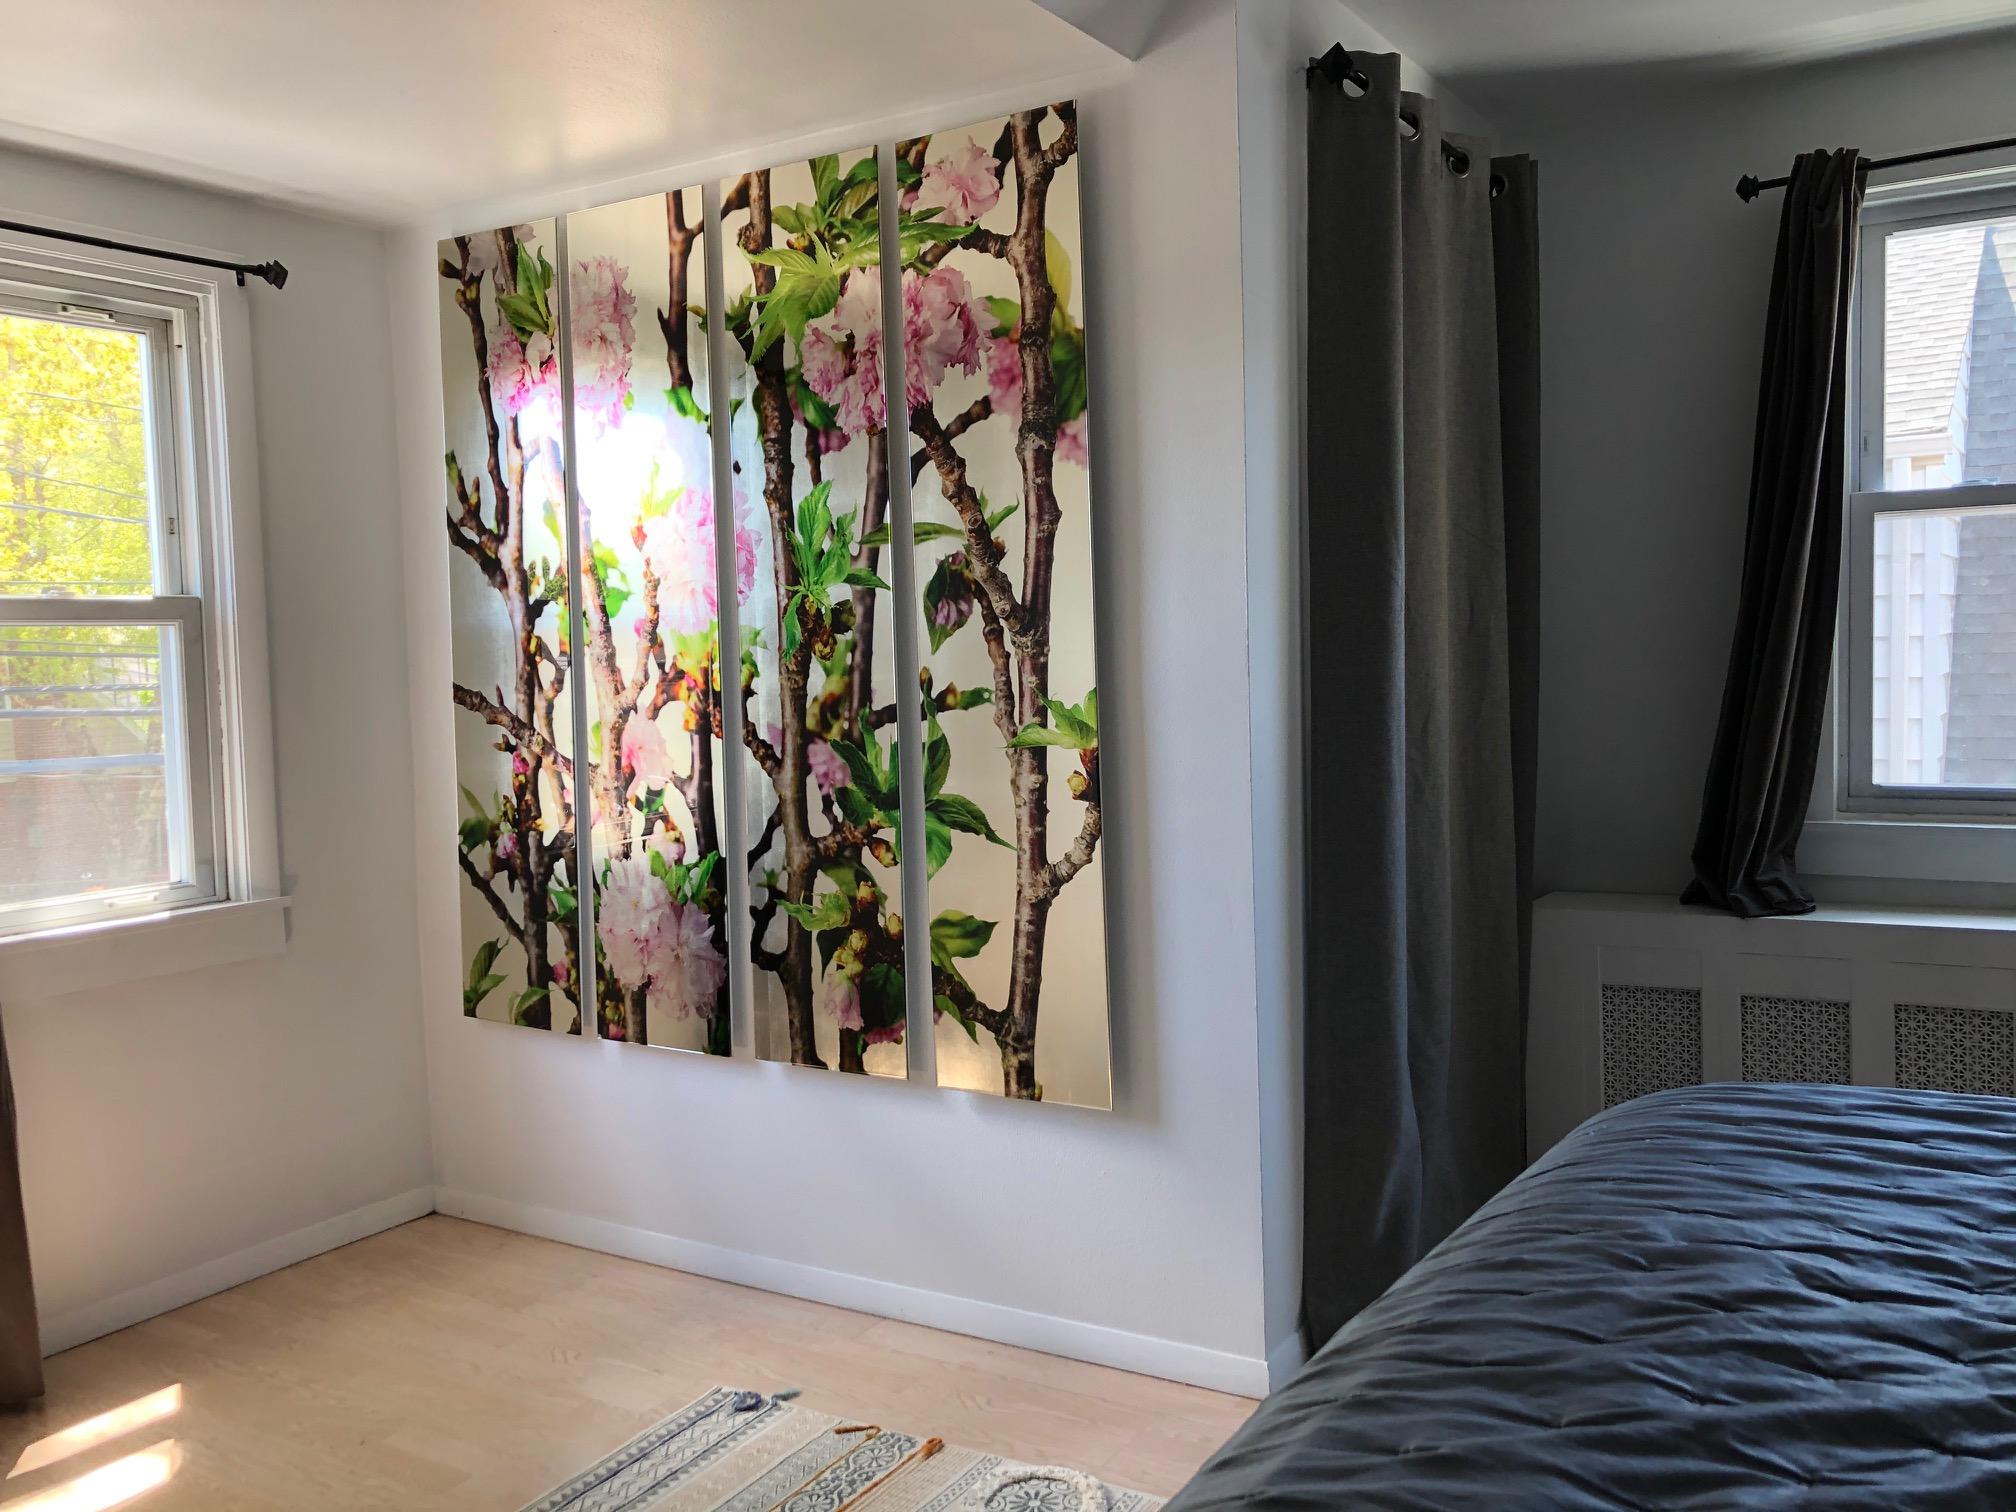 CHERRY BLOSSOM TRIPTYCH, large scale (66 x 59 